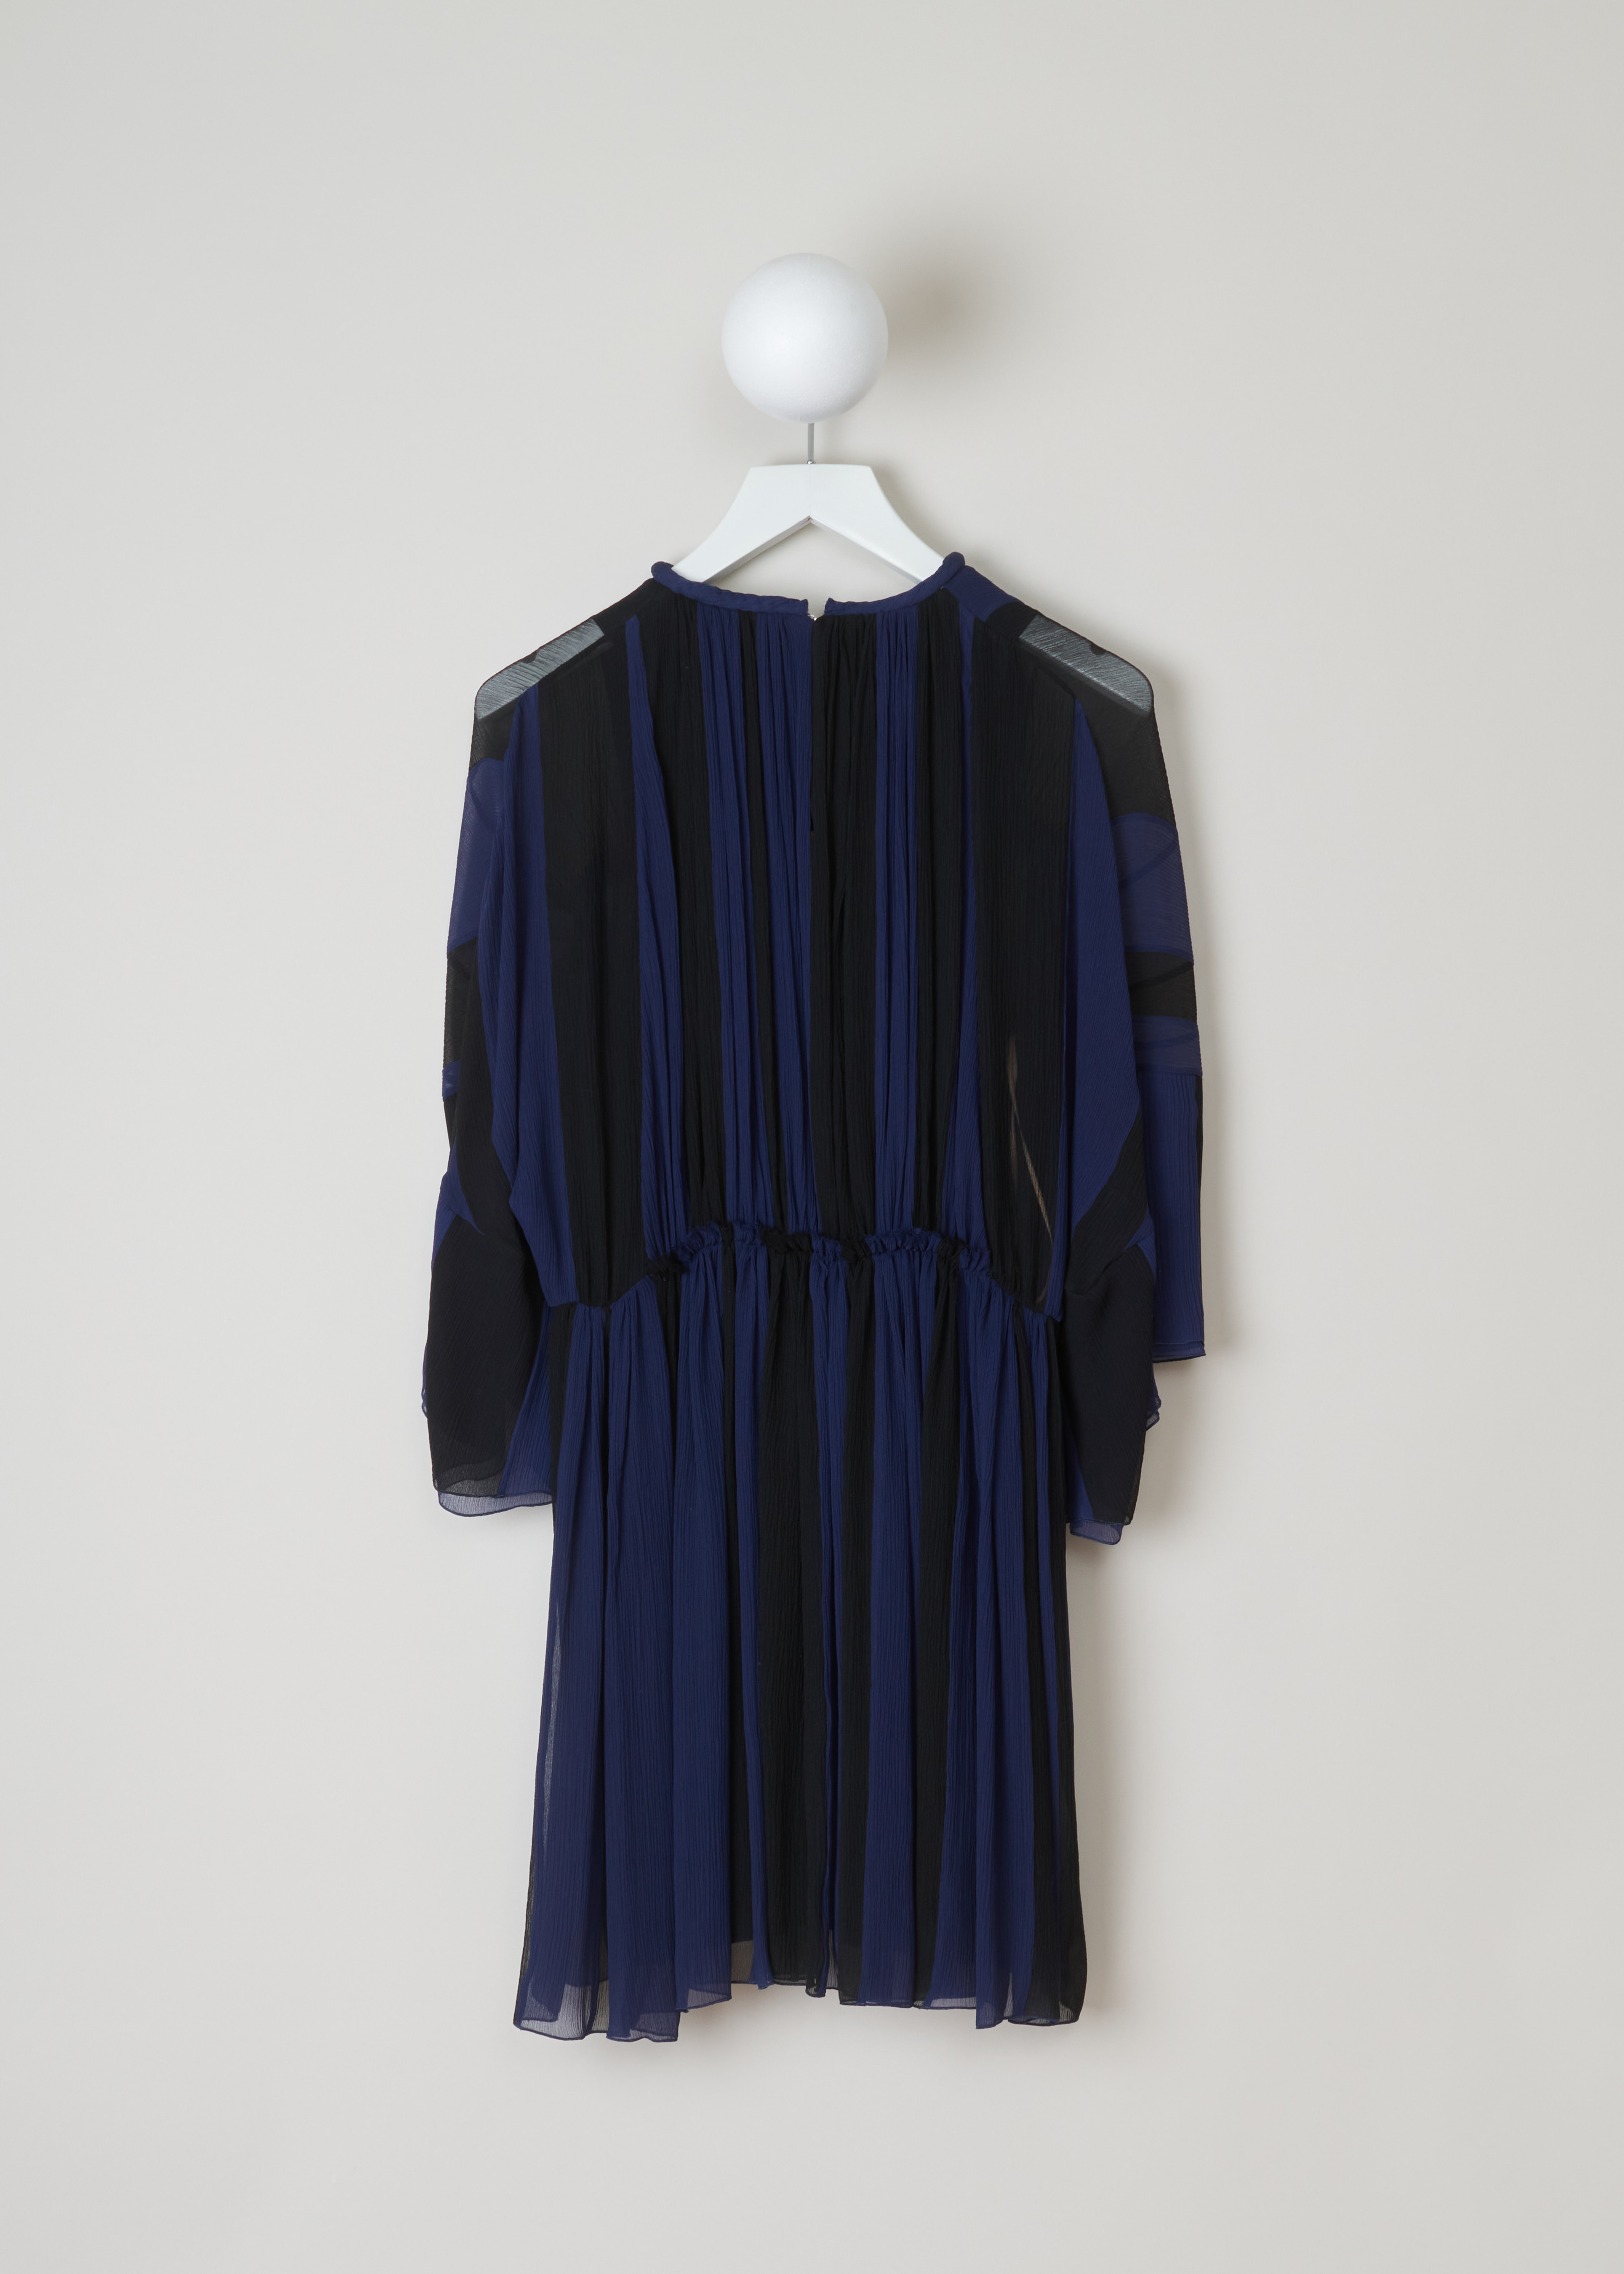 ChloÃ© Gathered slik crepe dress CHC19ARO37006925_925_Black_Blue back. This chic silk crepe dress has a blue and black vertically striped pattern. A gathered round neckline and ruffled sheer long sleeves. A ruffled waist and flared gathered midi skirt. 